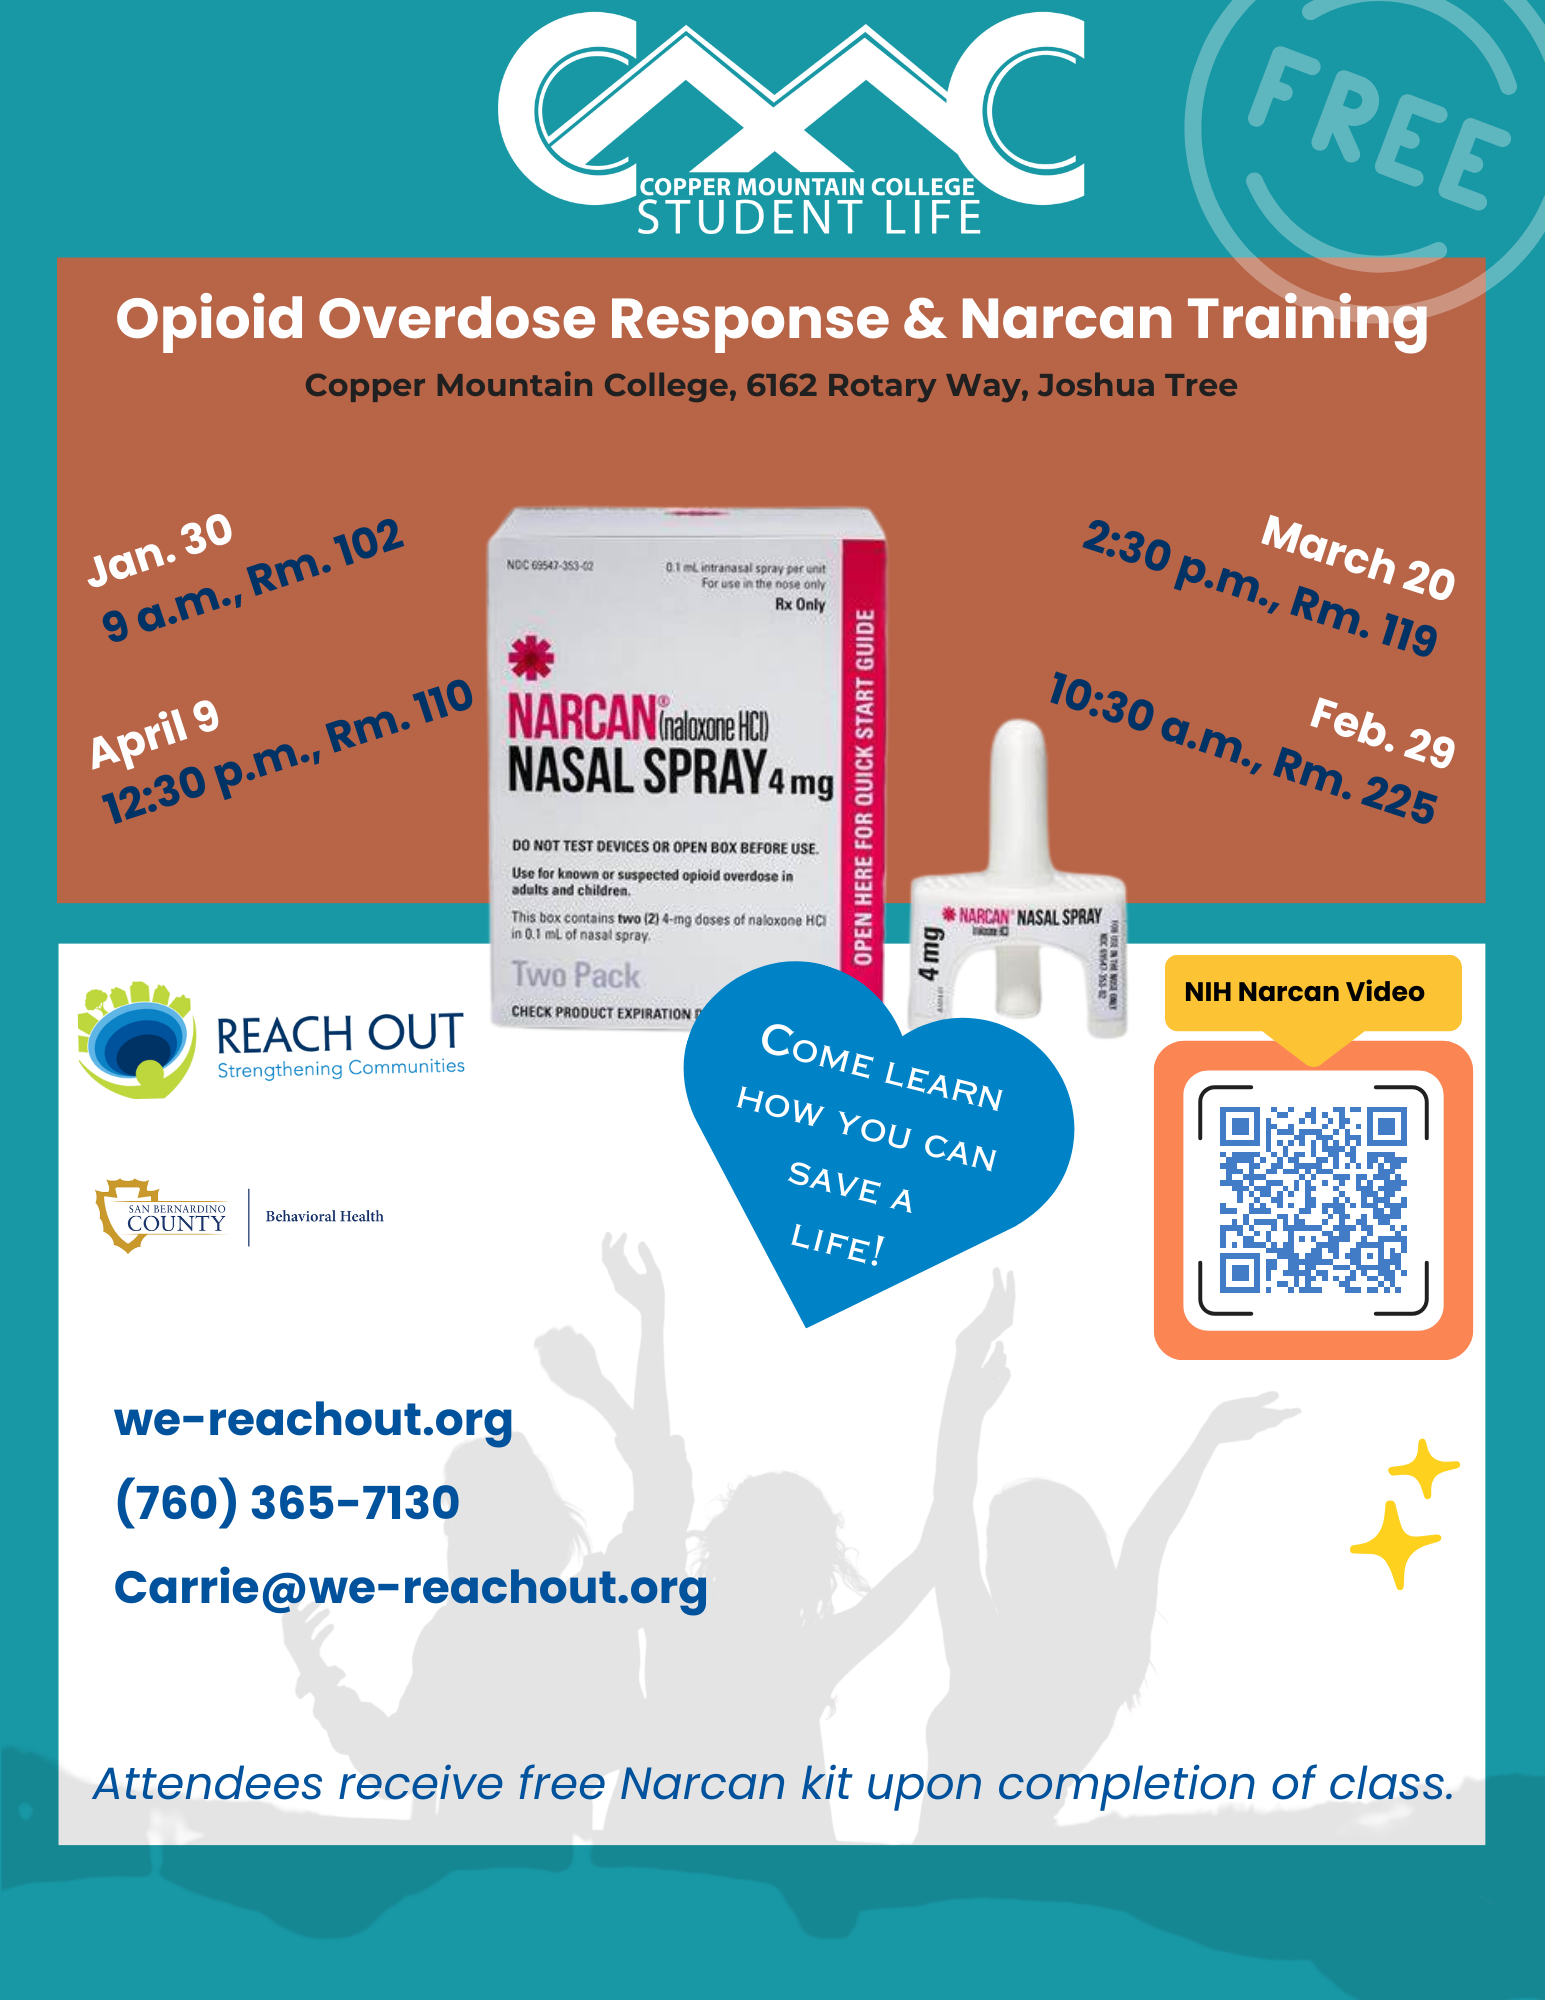 Opioid Overdose Response & Narcan Training will take place on January 30th at 9 am in room 102, February 29th at 10:30 am at 225, March 20th at 2:30pm in 119 and April 9th at 12:30 in room 110